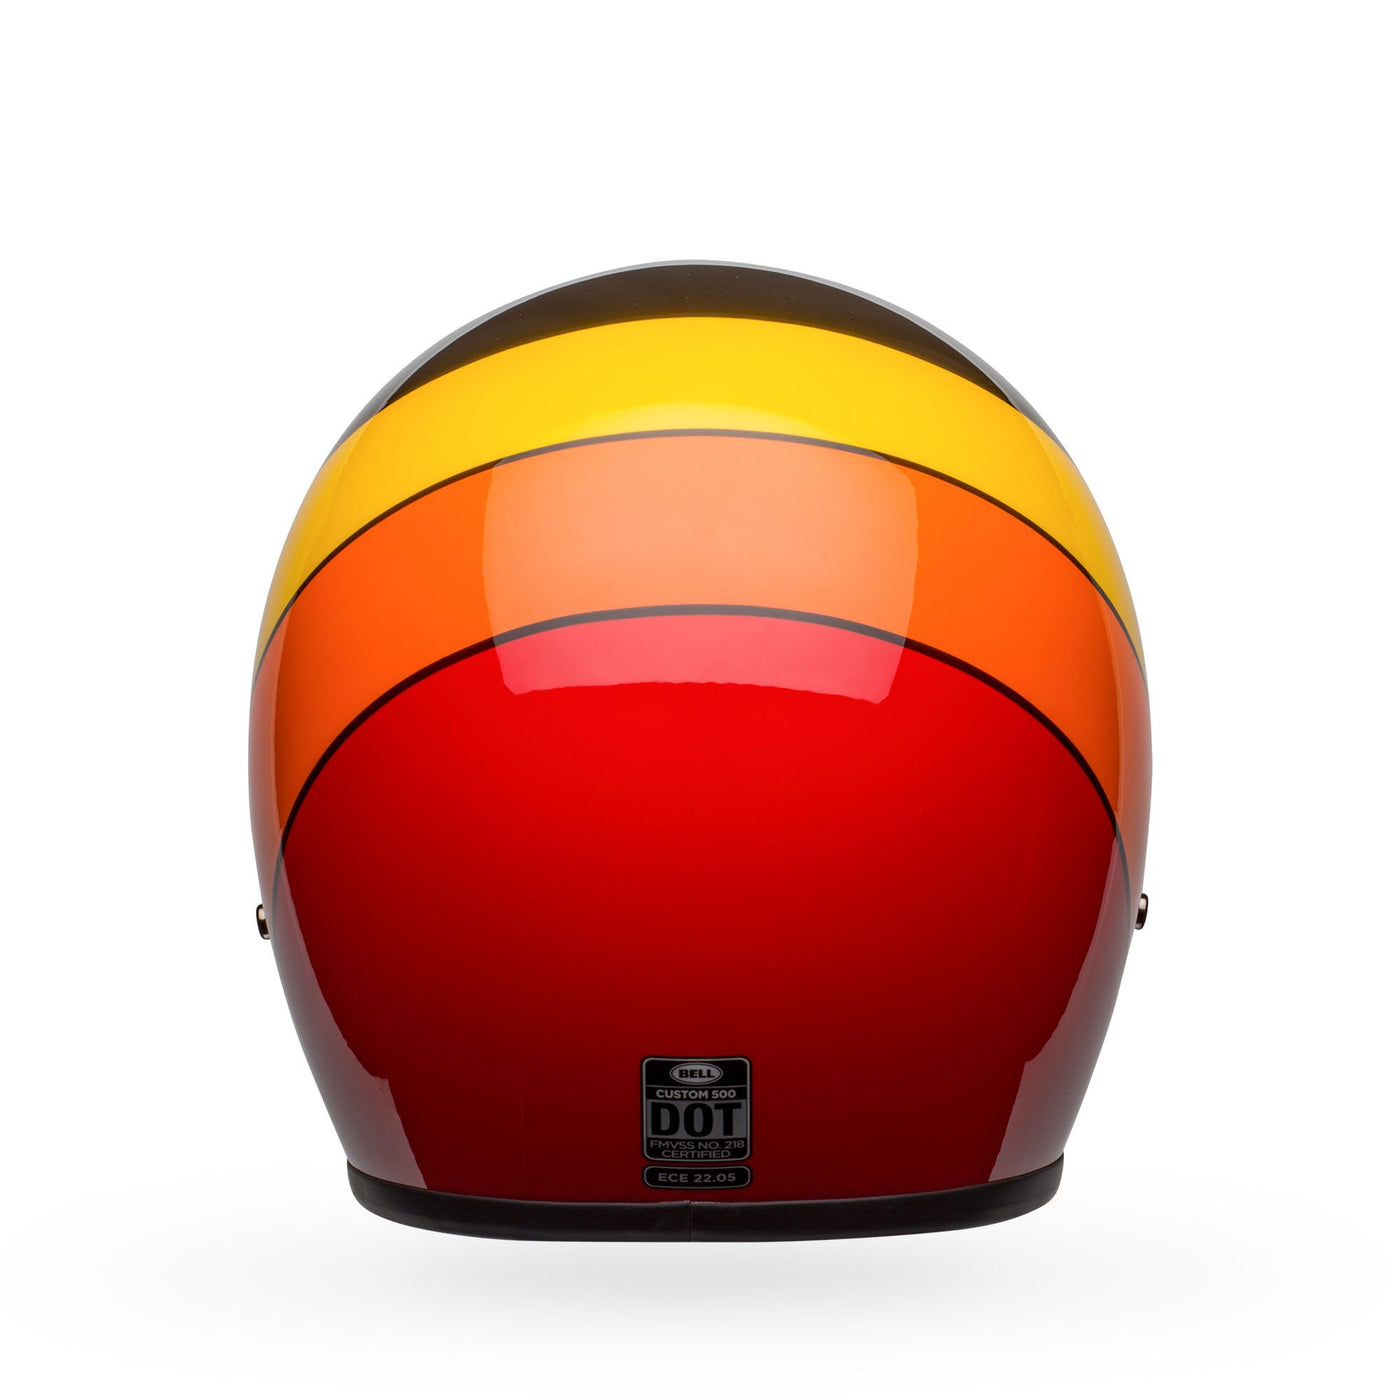 bell custom 500 culture classic open face motorcycle helmet riff gloss black yellow orange red back